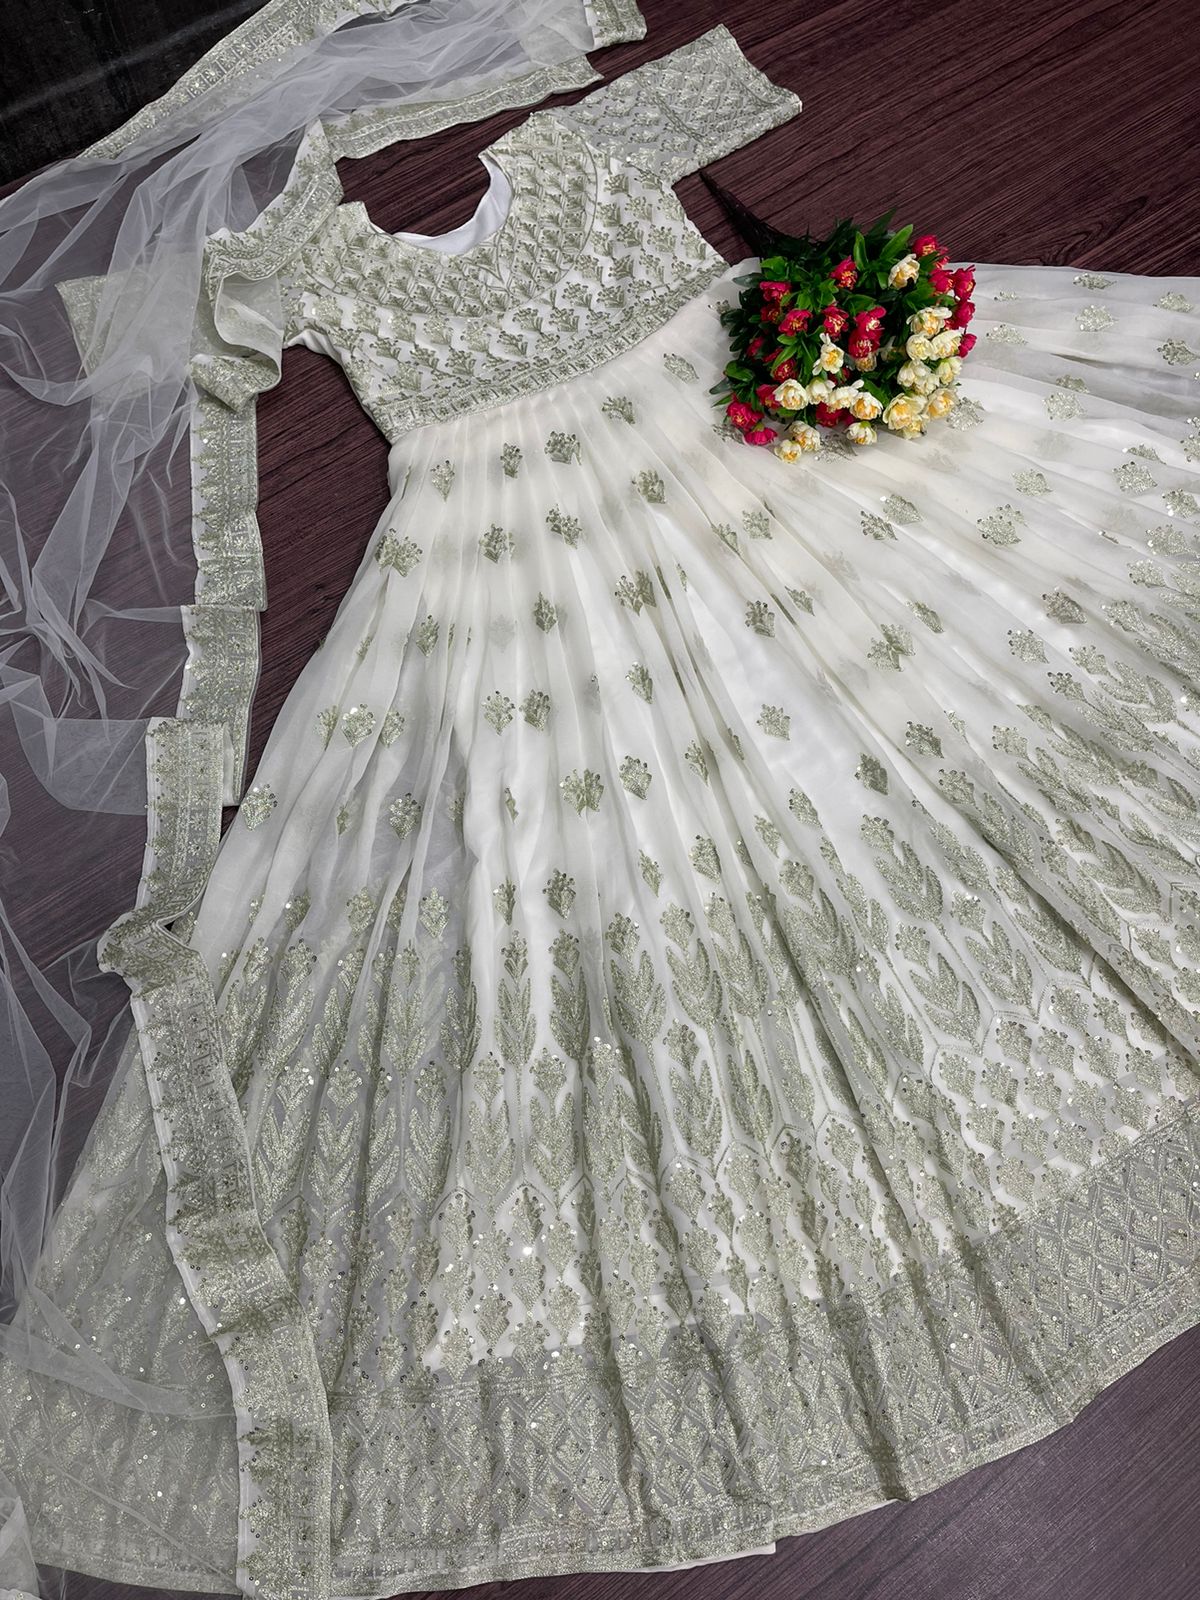 New Designer K Georgette Gown With Dupatta Anant Tex Exports Private Limited